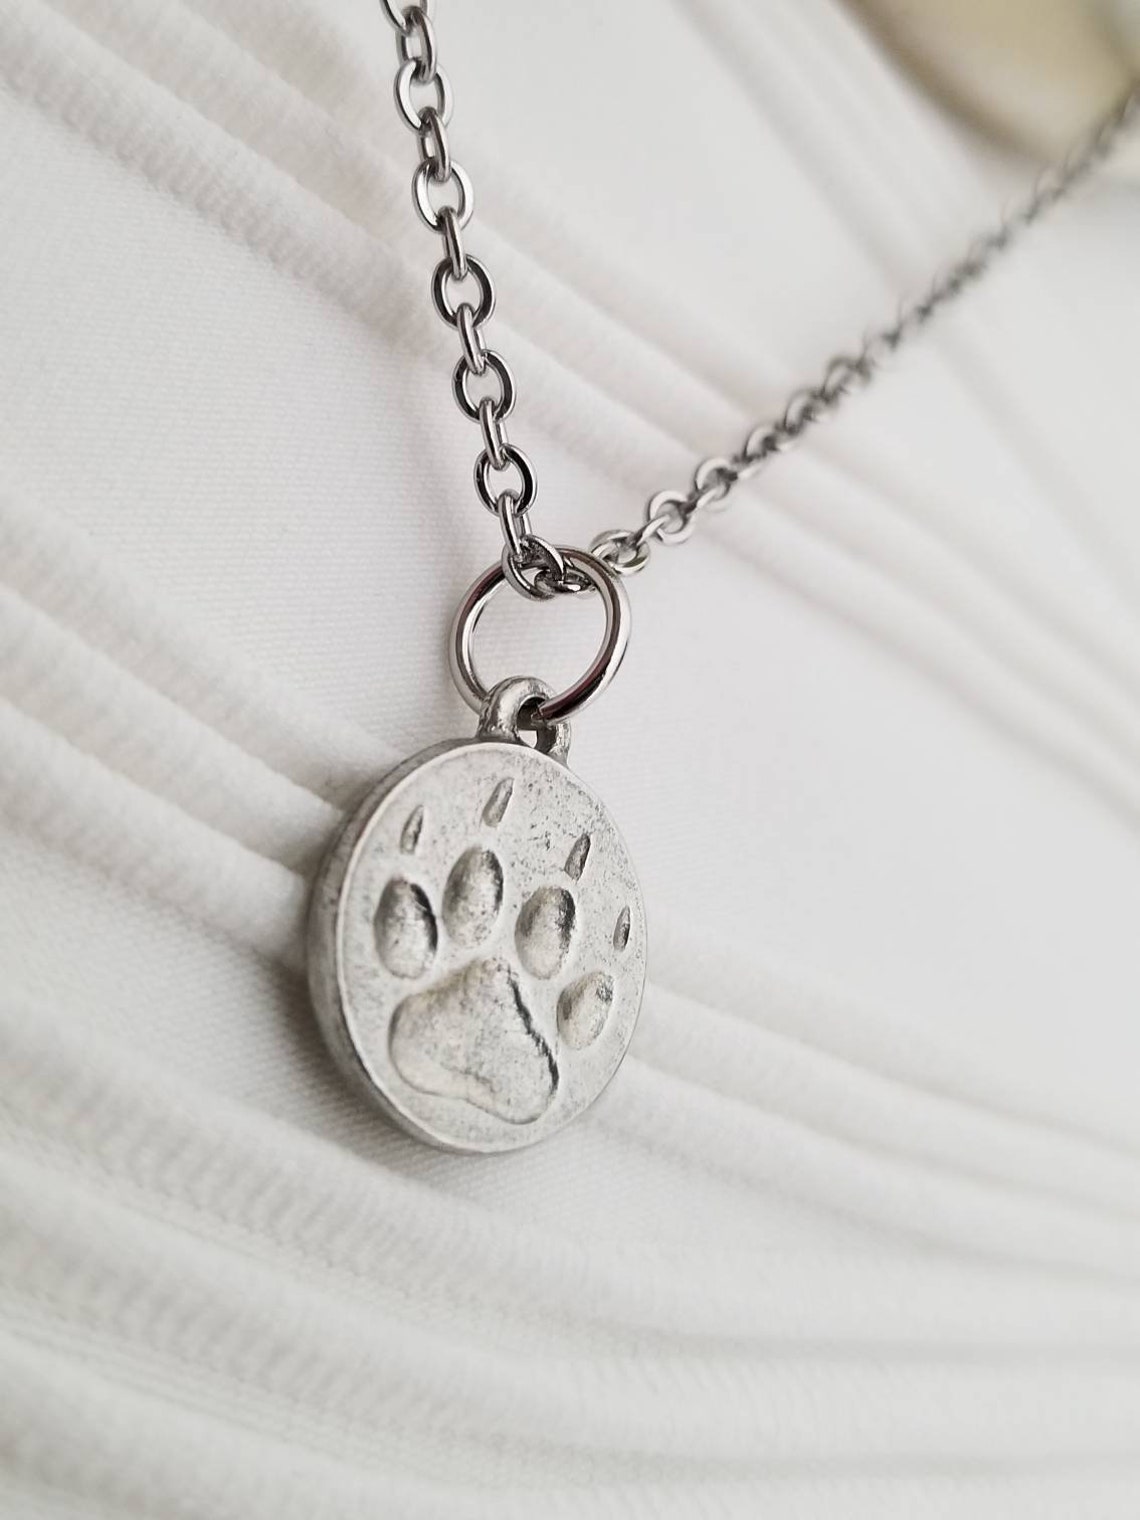 Paw Print Necklace Dog Necklace Tiny Paw Print Silver Pewter | Etsy